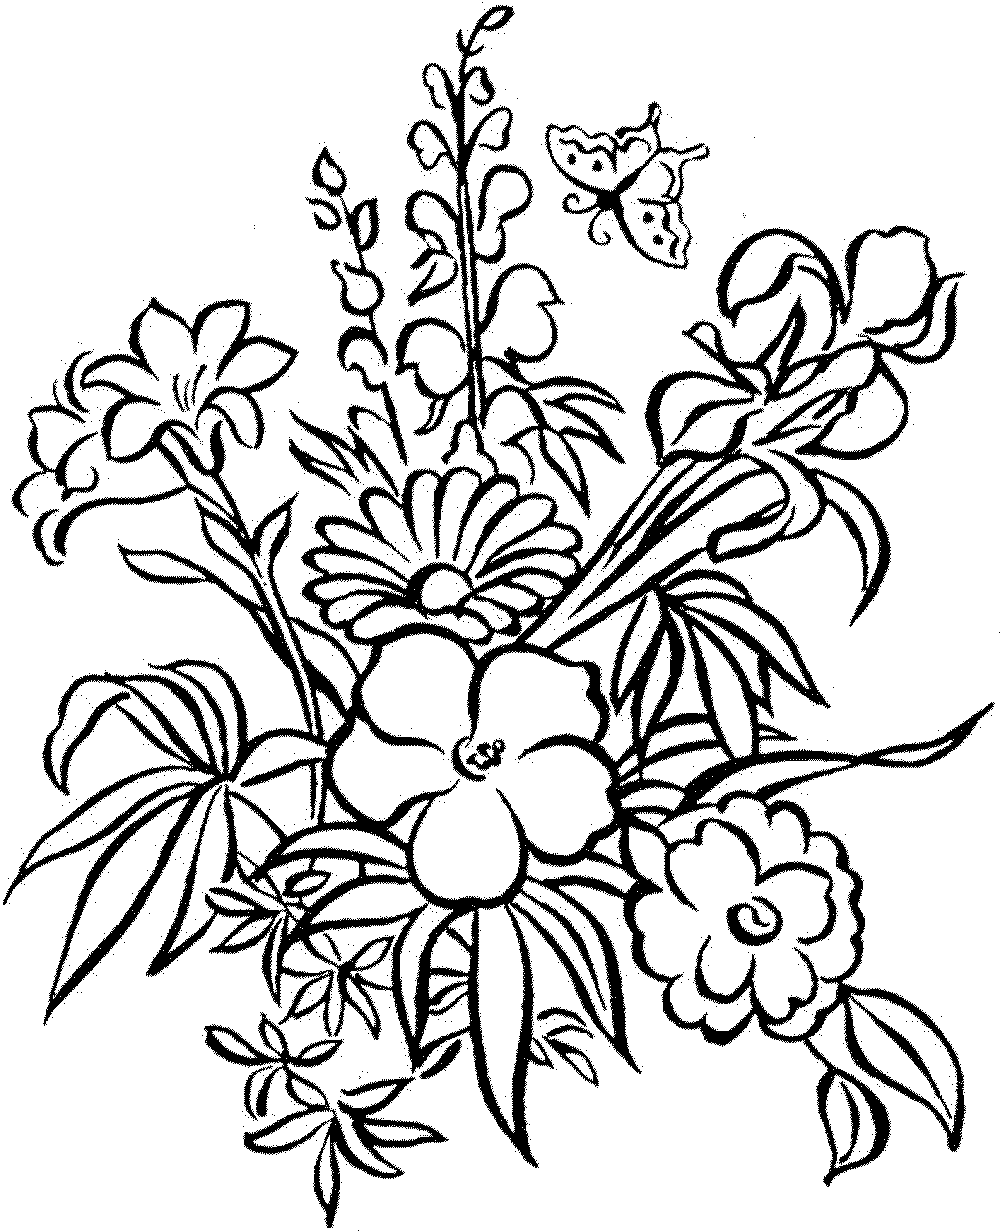 Cool Flower Coloring Pages For Adults   Coloring Home